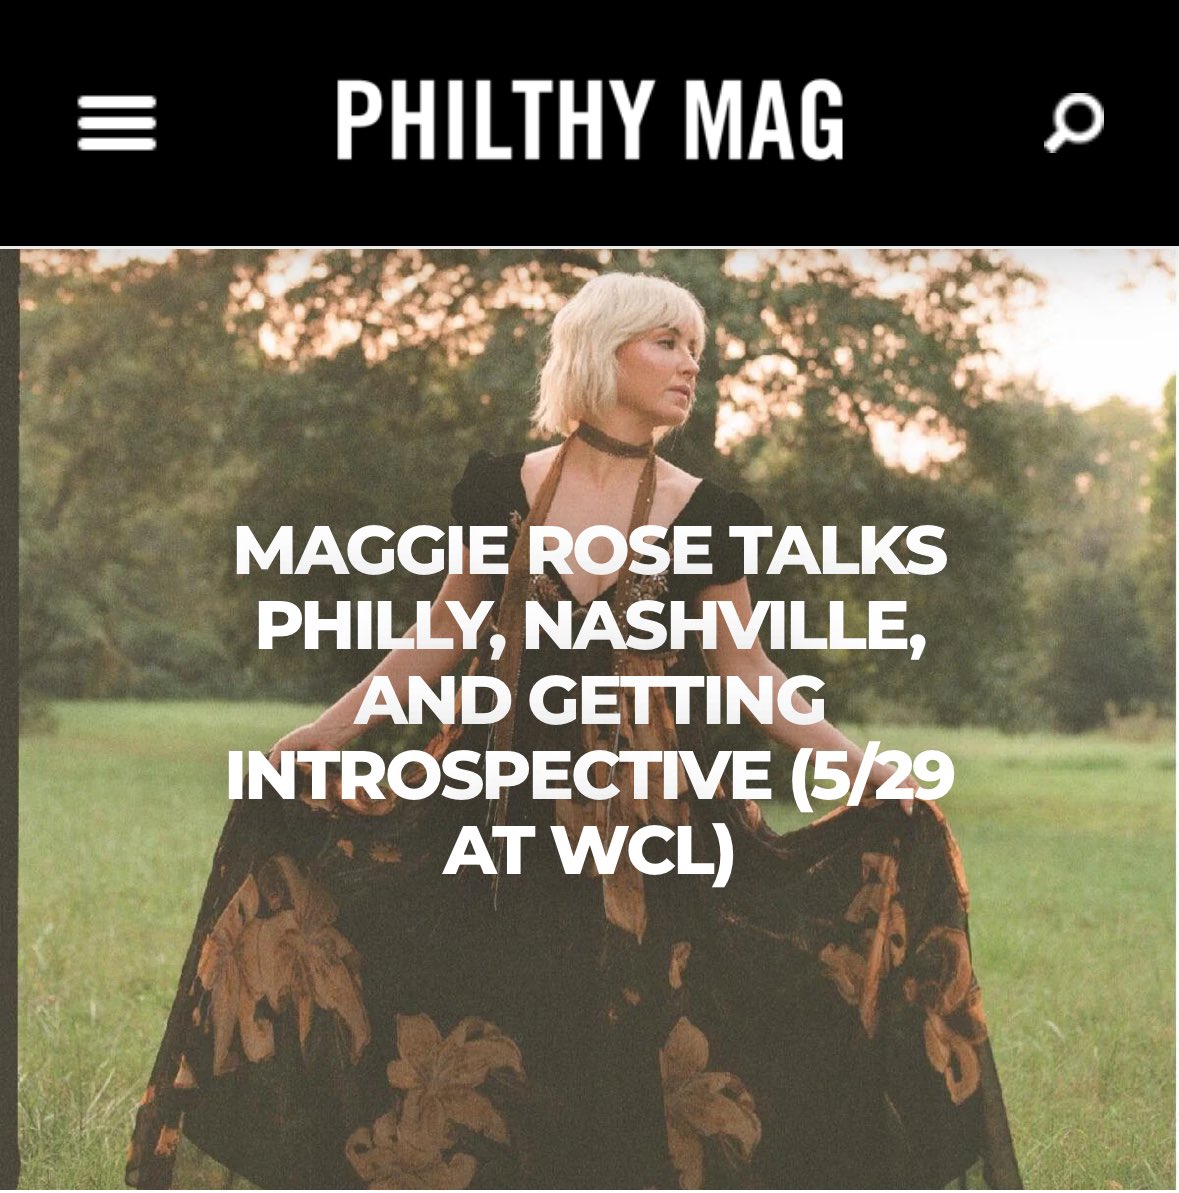 Thanks to @philthymag for chatting with me ahead of our show at @worldcafelive in Philadelphia, PA this Wednesday! Read here: tinyurl.com/344vnjsc @IzzyCihak @visitphilly